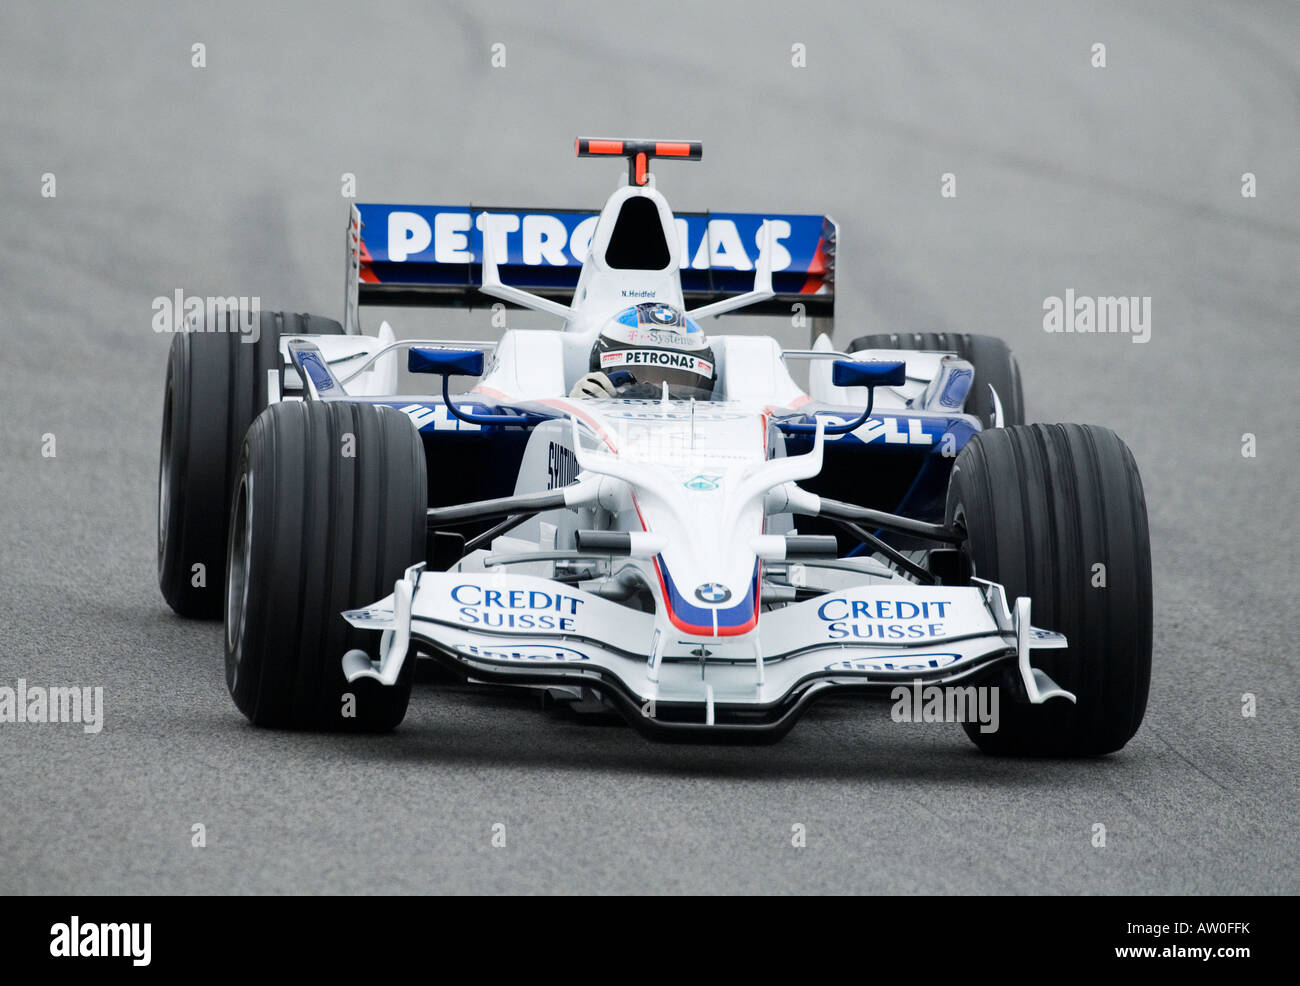 Nick HEIDFELD (GER) in the BMW F1.-08 Formula 1 racecar during testing sessions in Feb 2008 Stock Photo